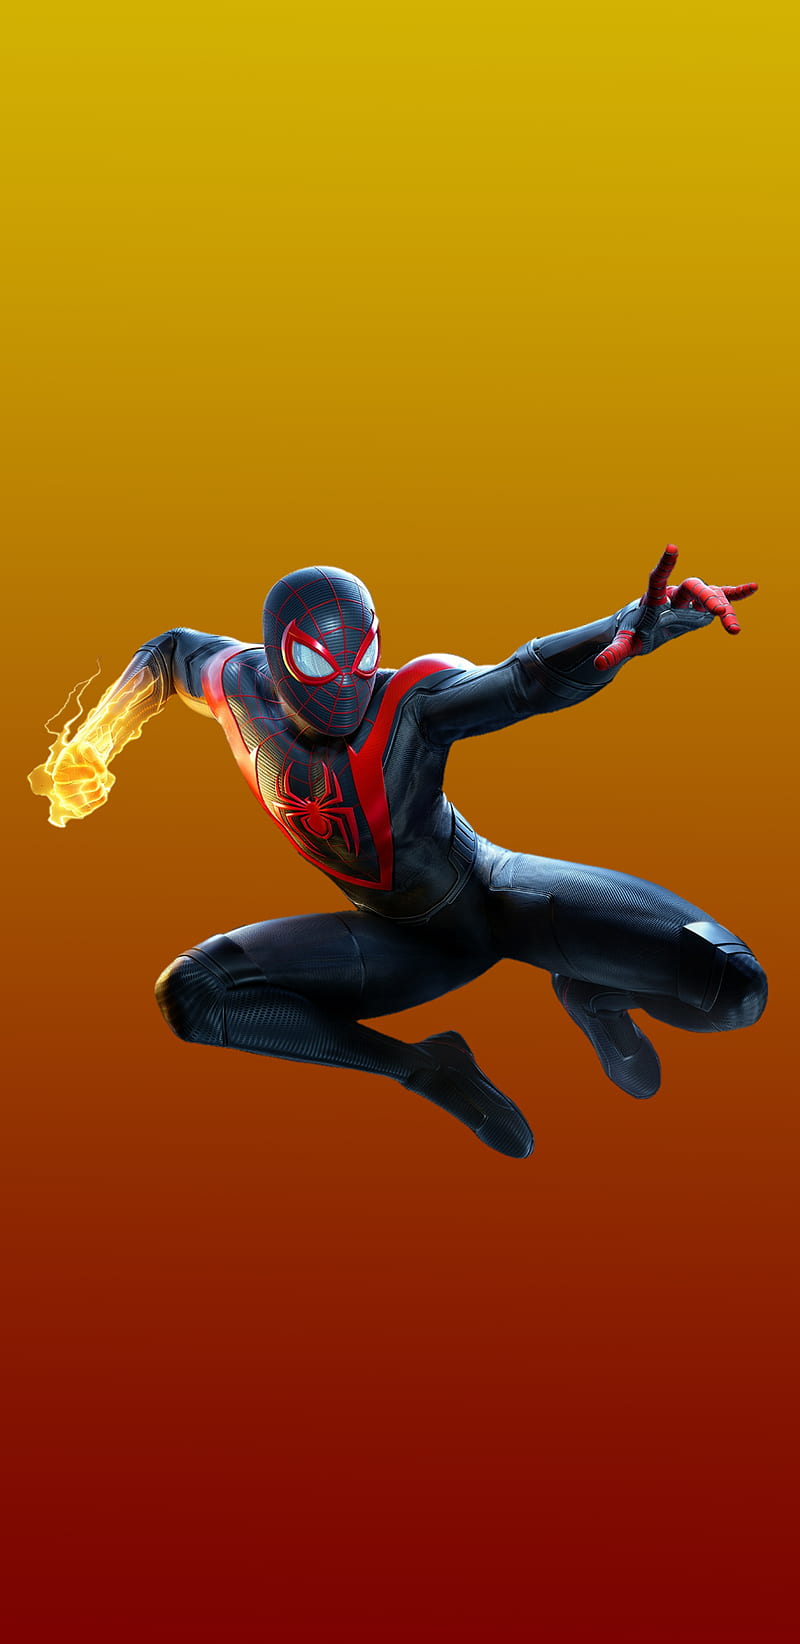 Marvel's Spider-Man: Miles Morales - PS4 and PS5 Games